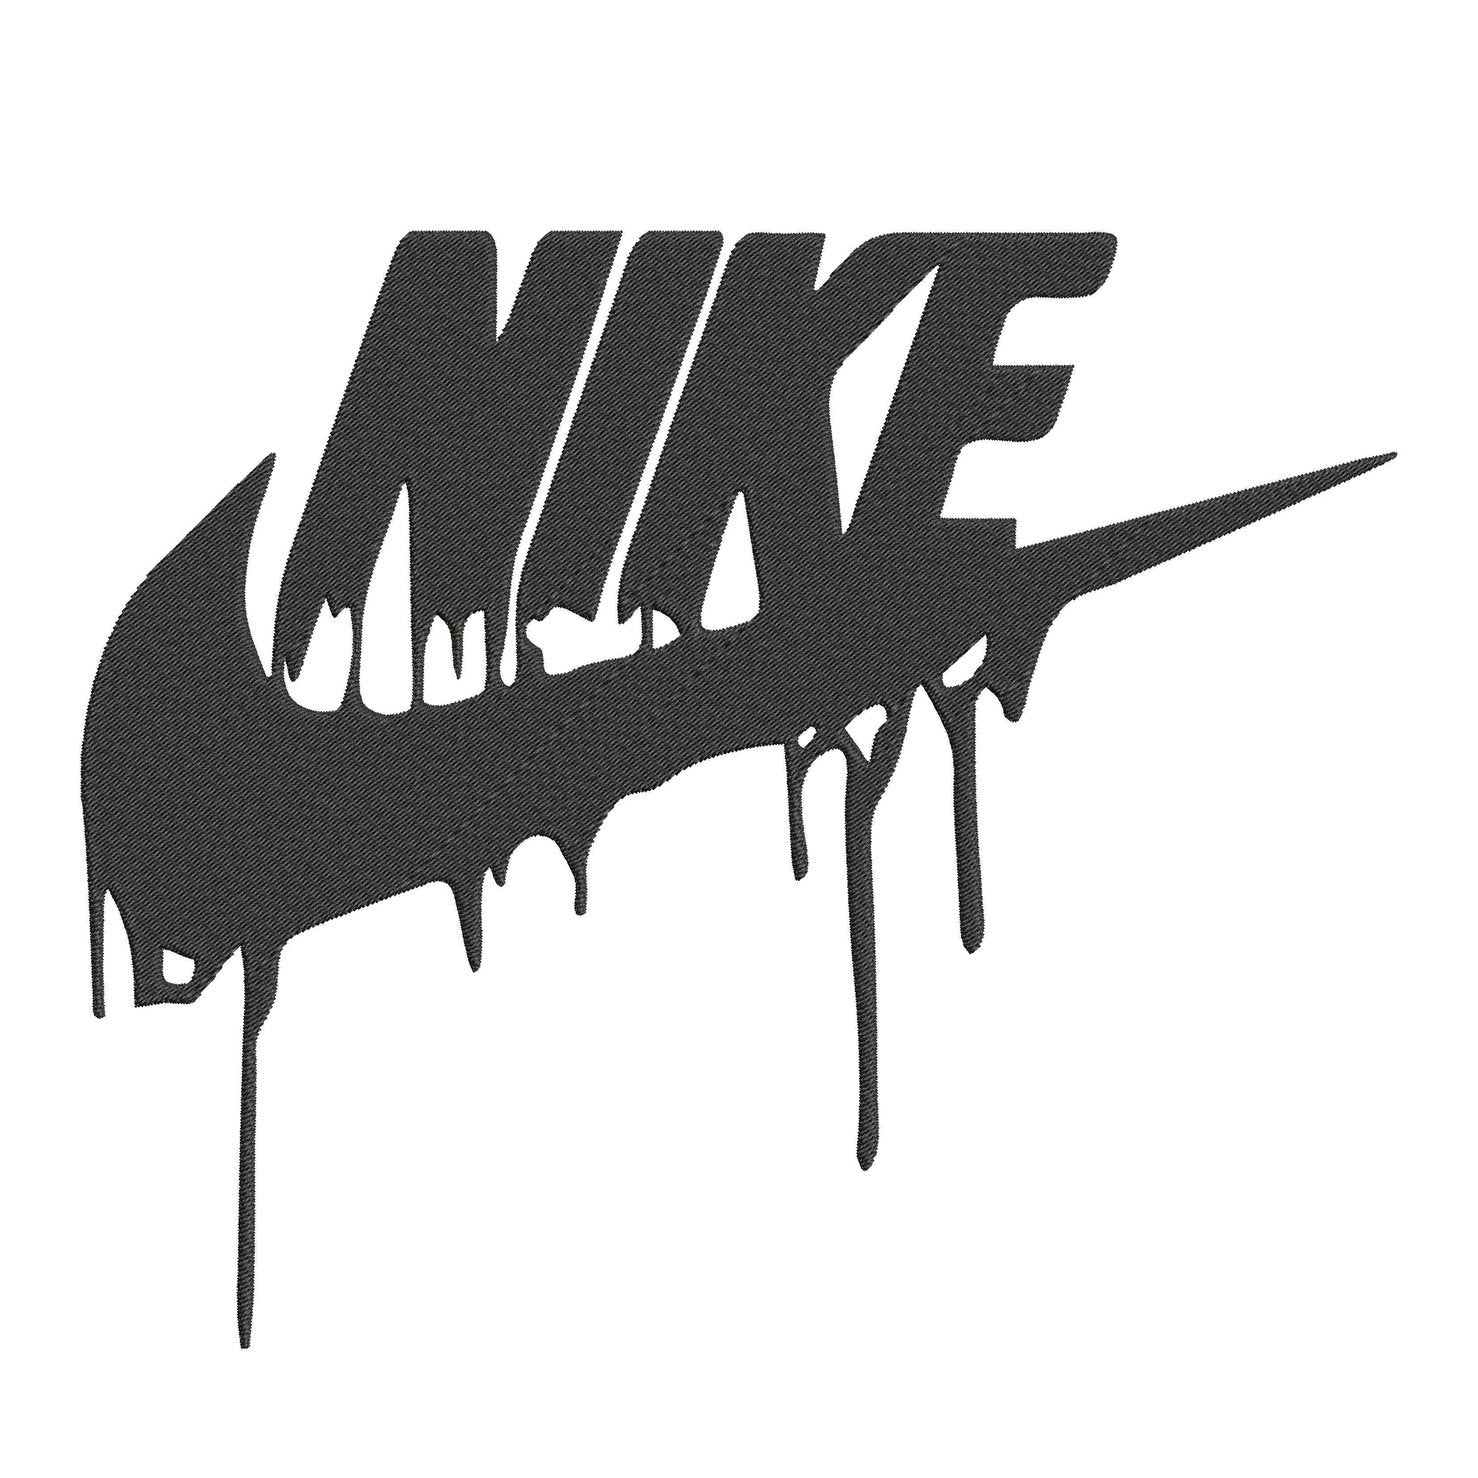 Nike Black - Embroidery Design FineryEmbroidery